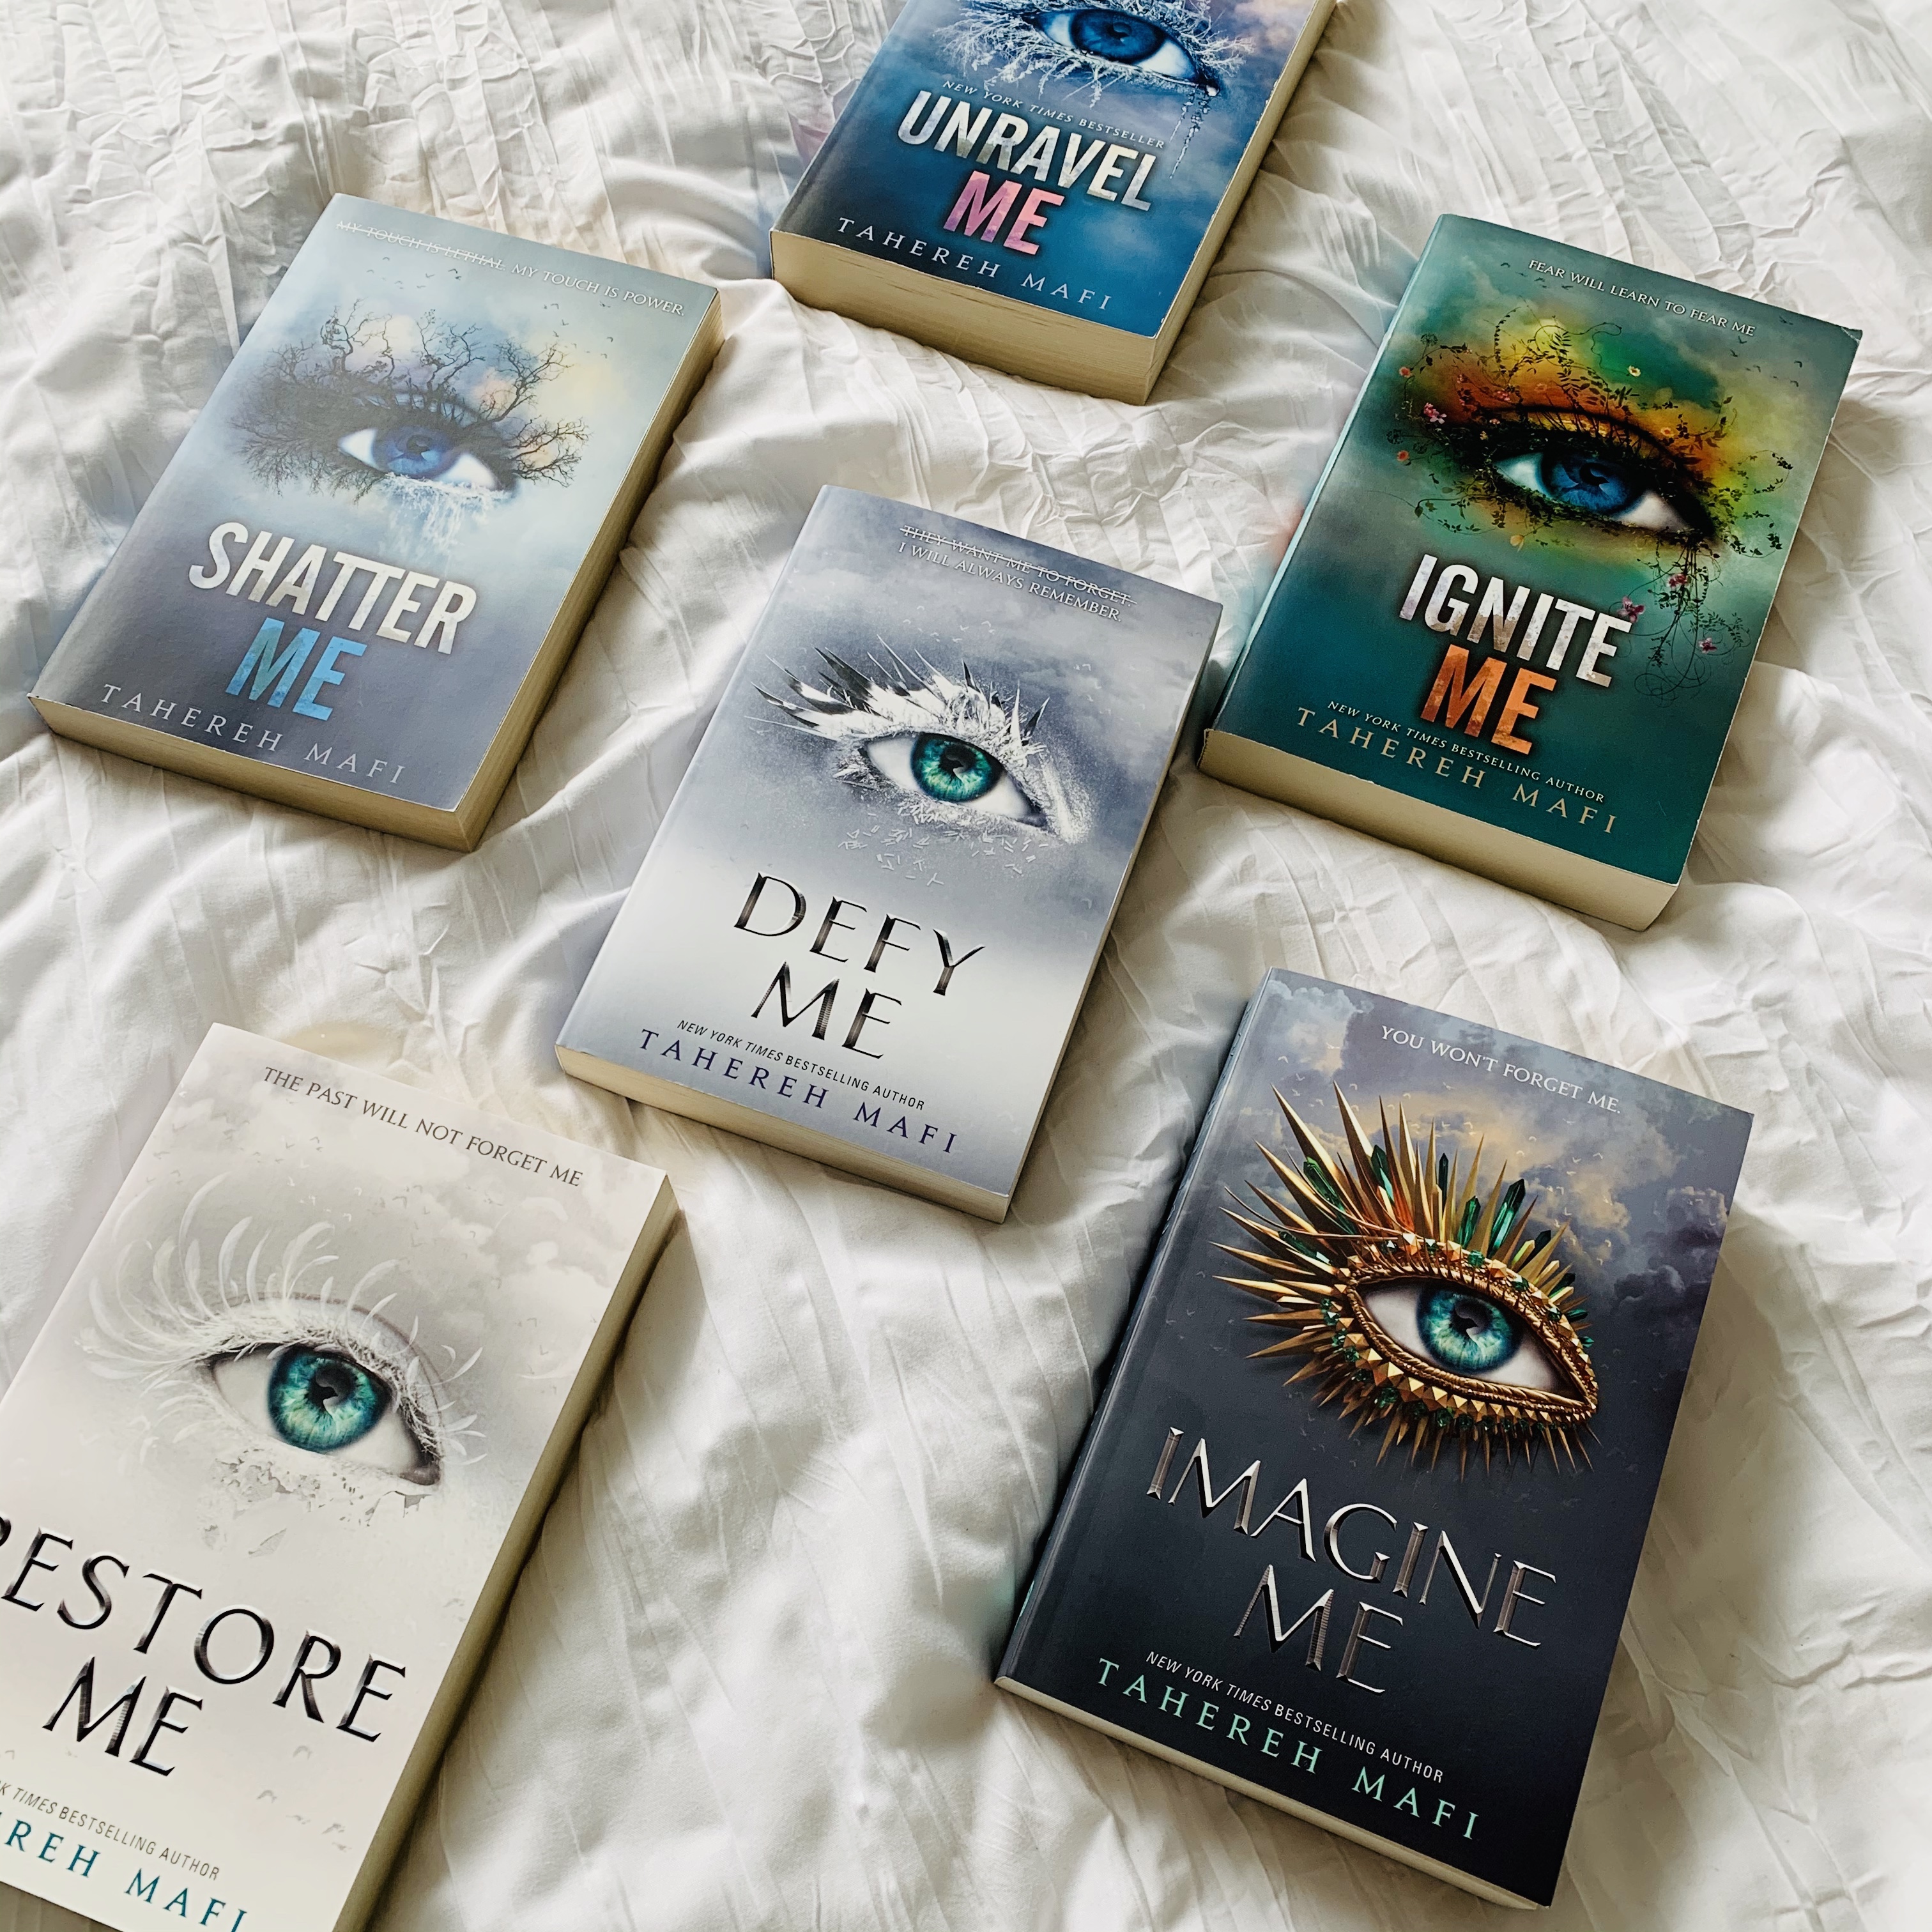 Ignite Me (Shatter Me, #3) by Tahereh Mafi